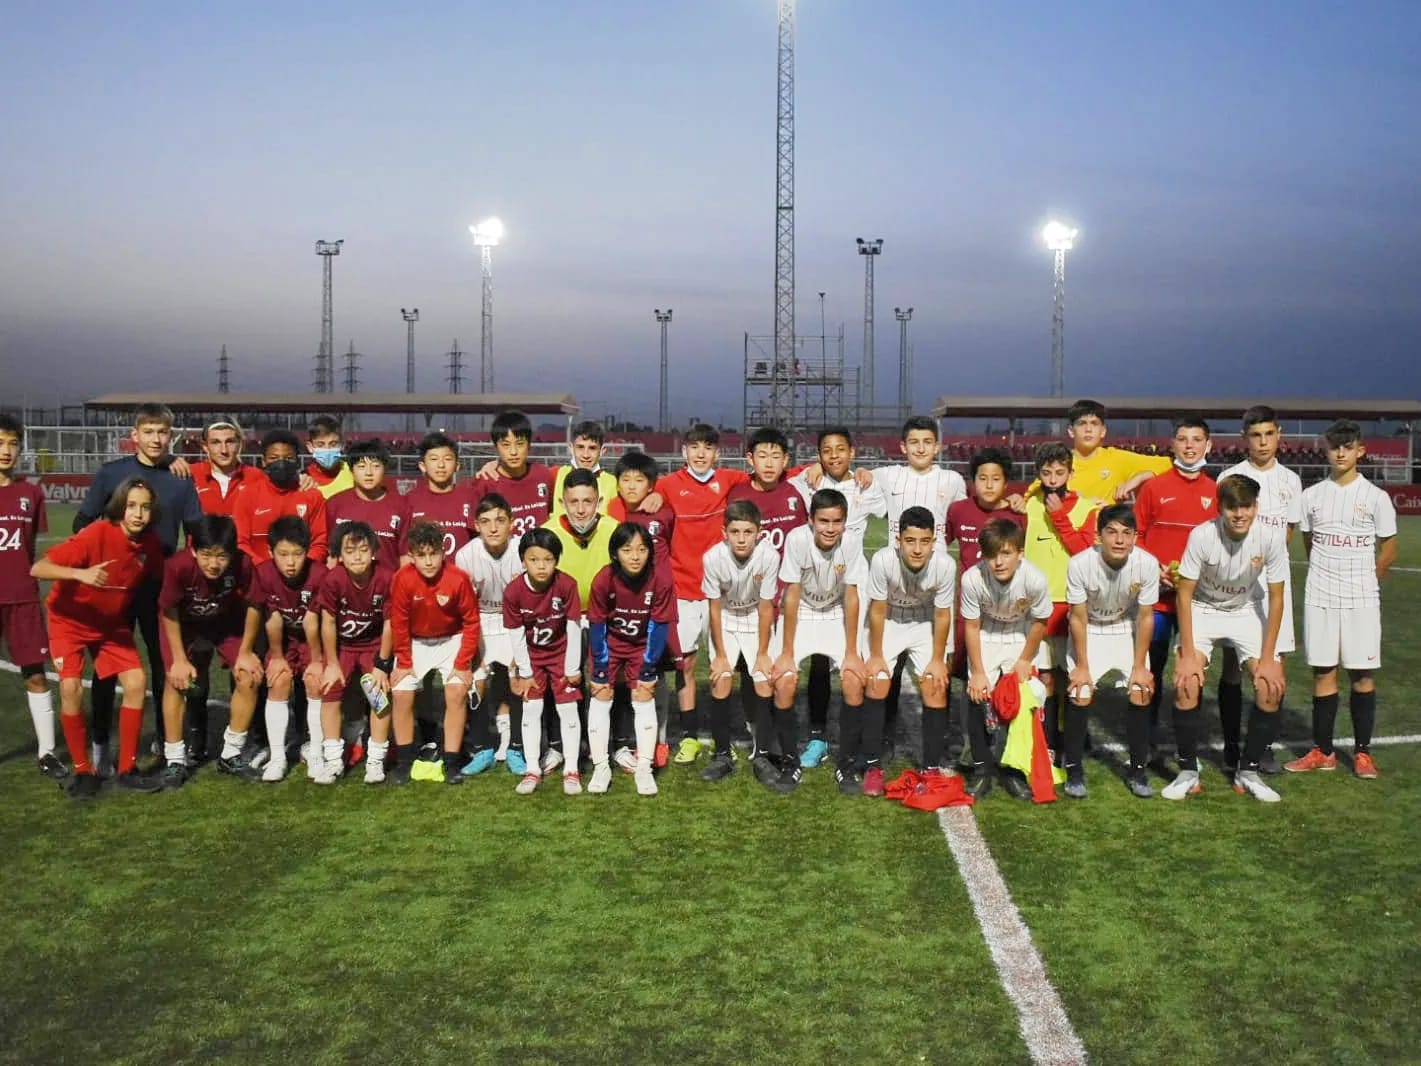 LaLiga Grassroots youngsters